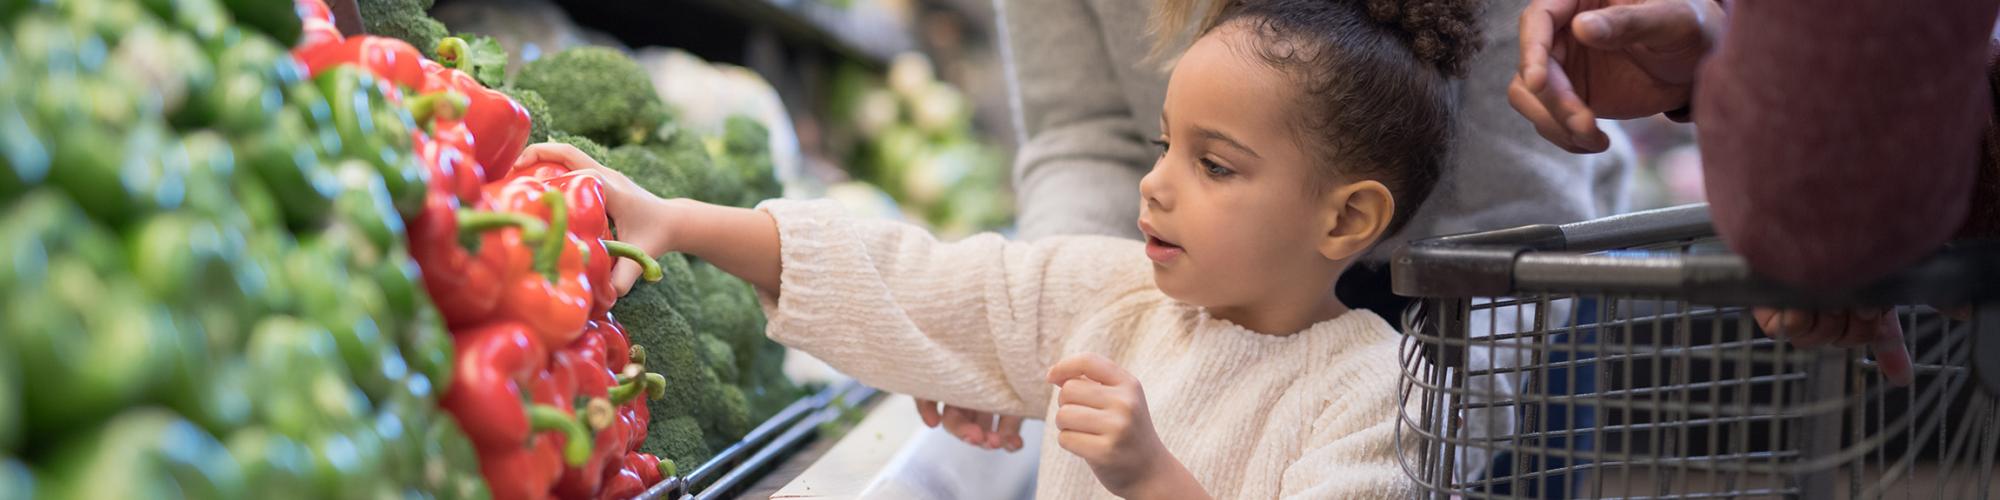 child picking out healthy food